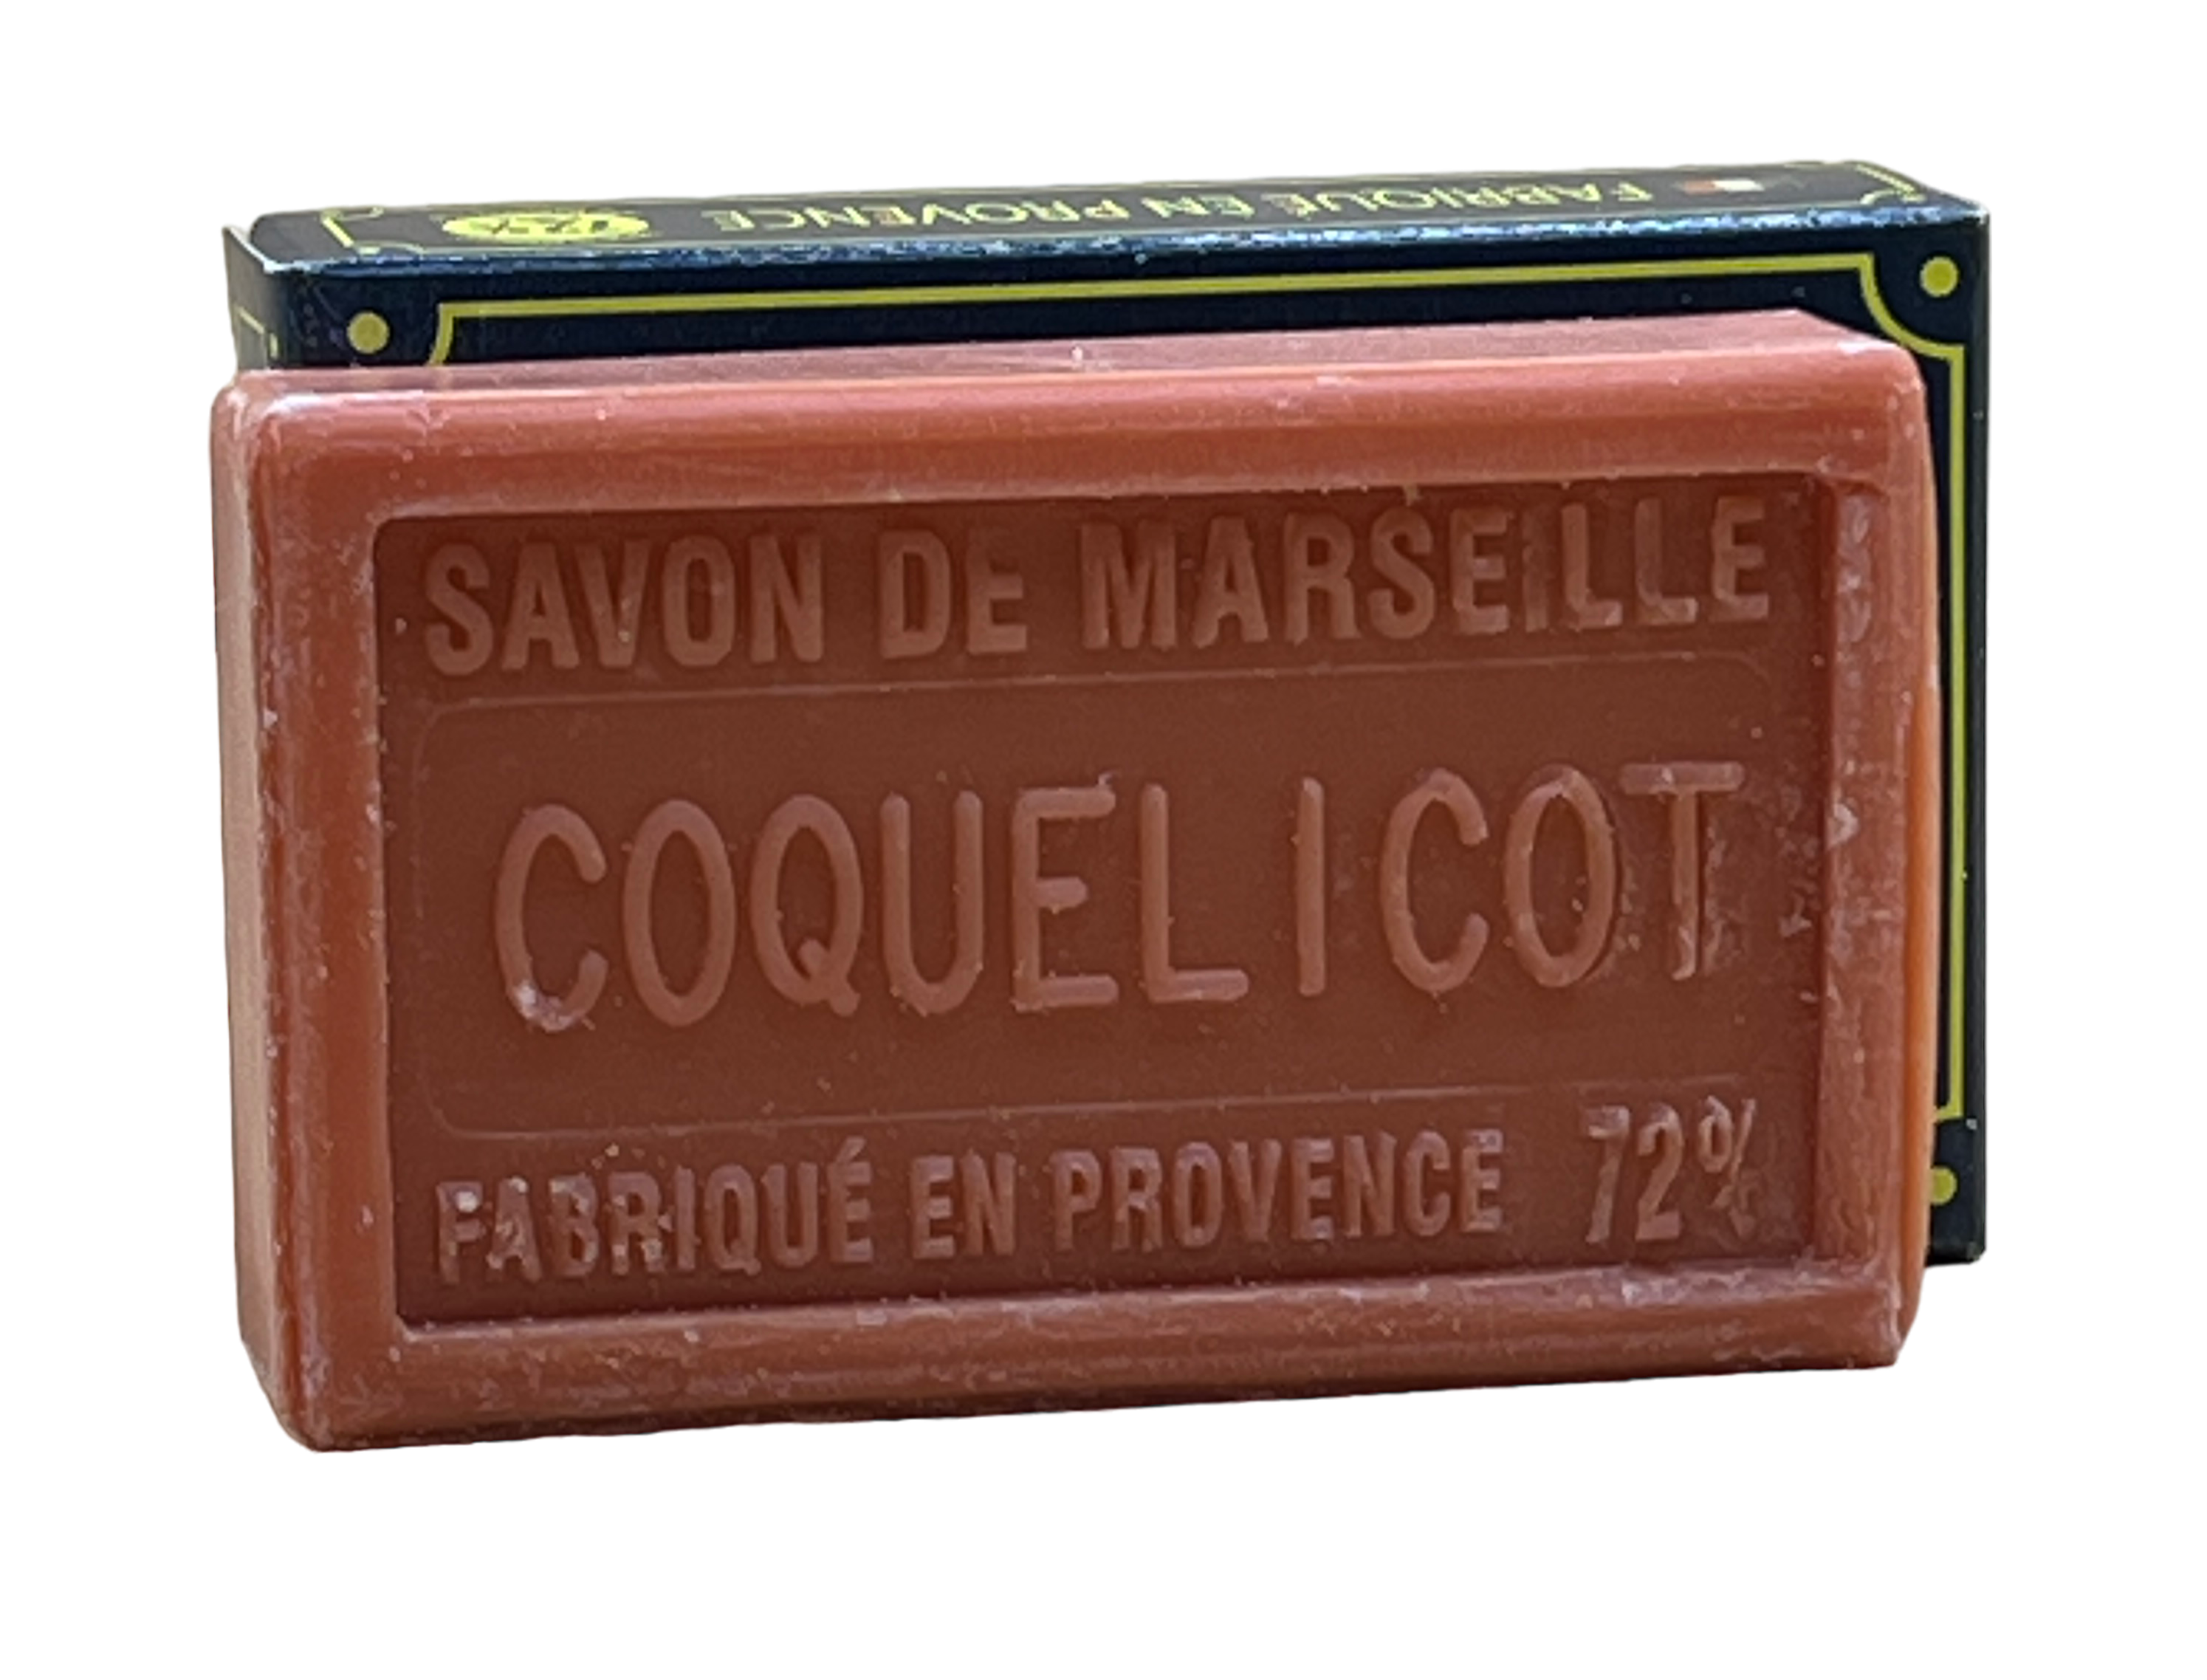 Coquelicot (Poppy), Marseille Soap with Shea Butter | 100g - 0